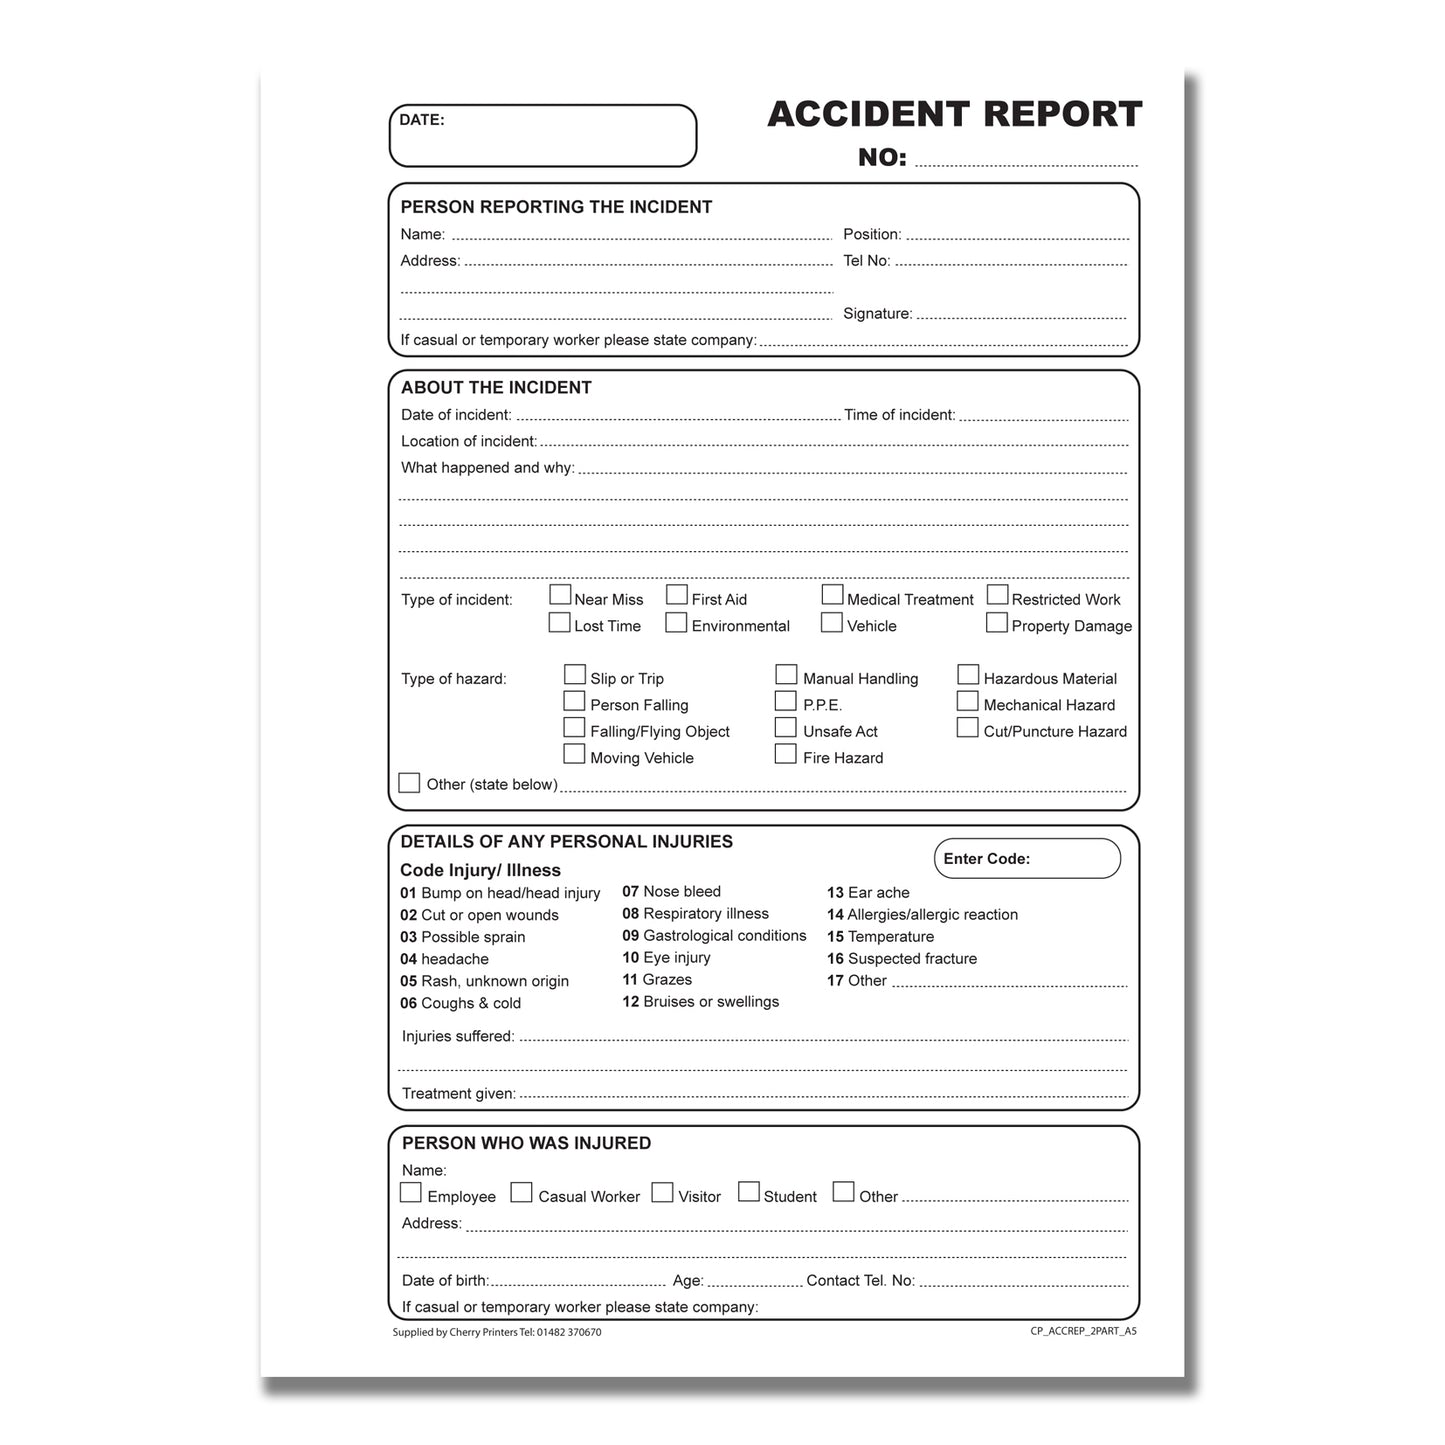 NCR Accident Report Book A5 Duplicate